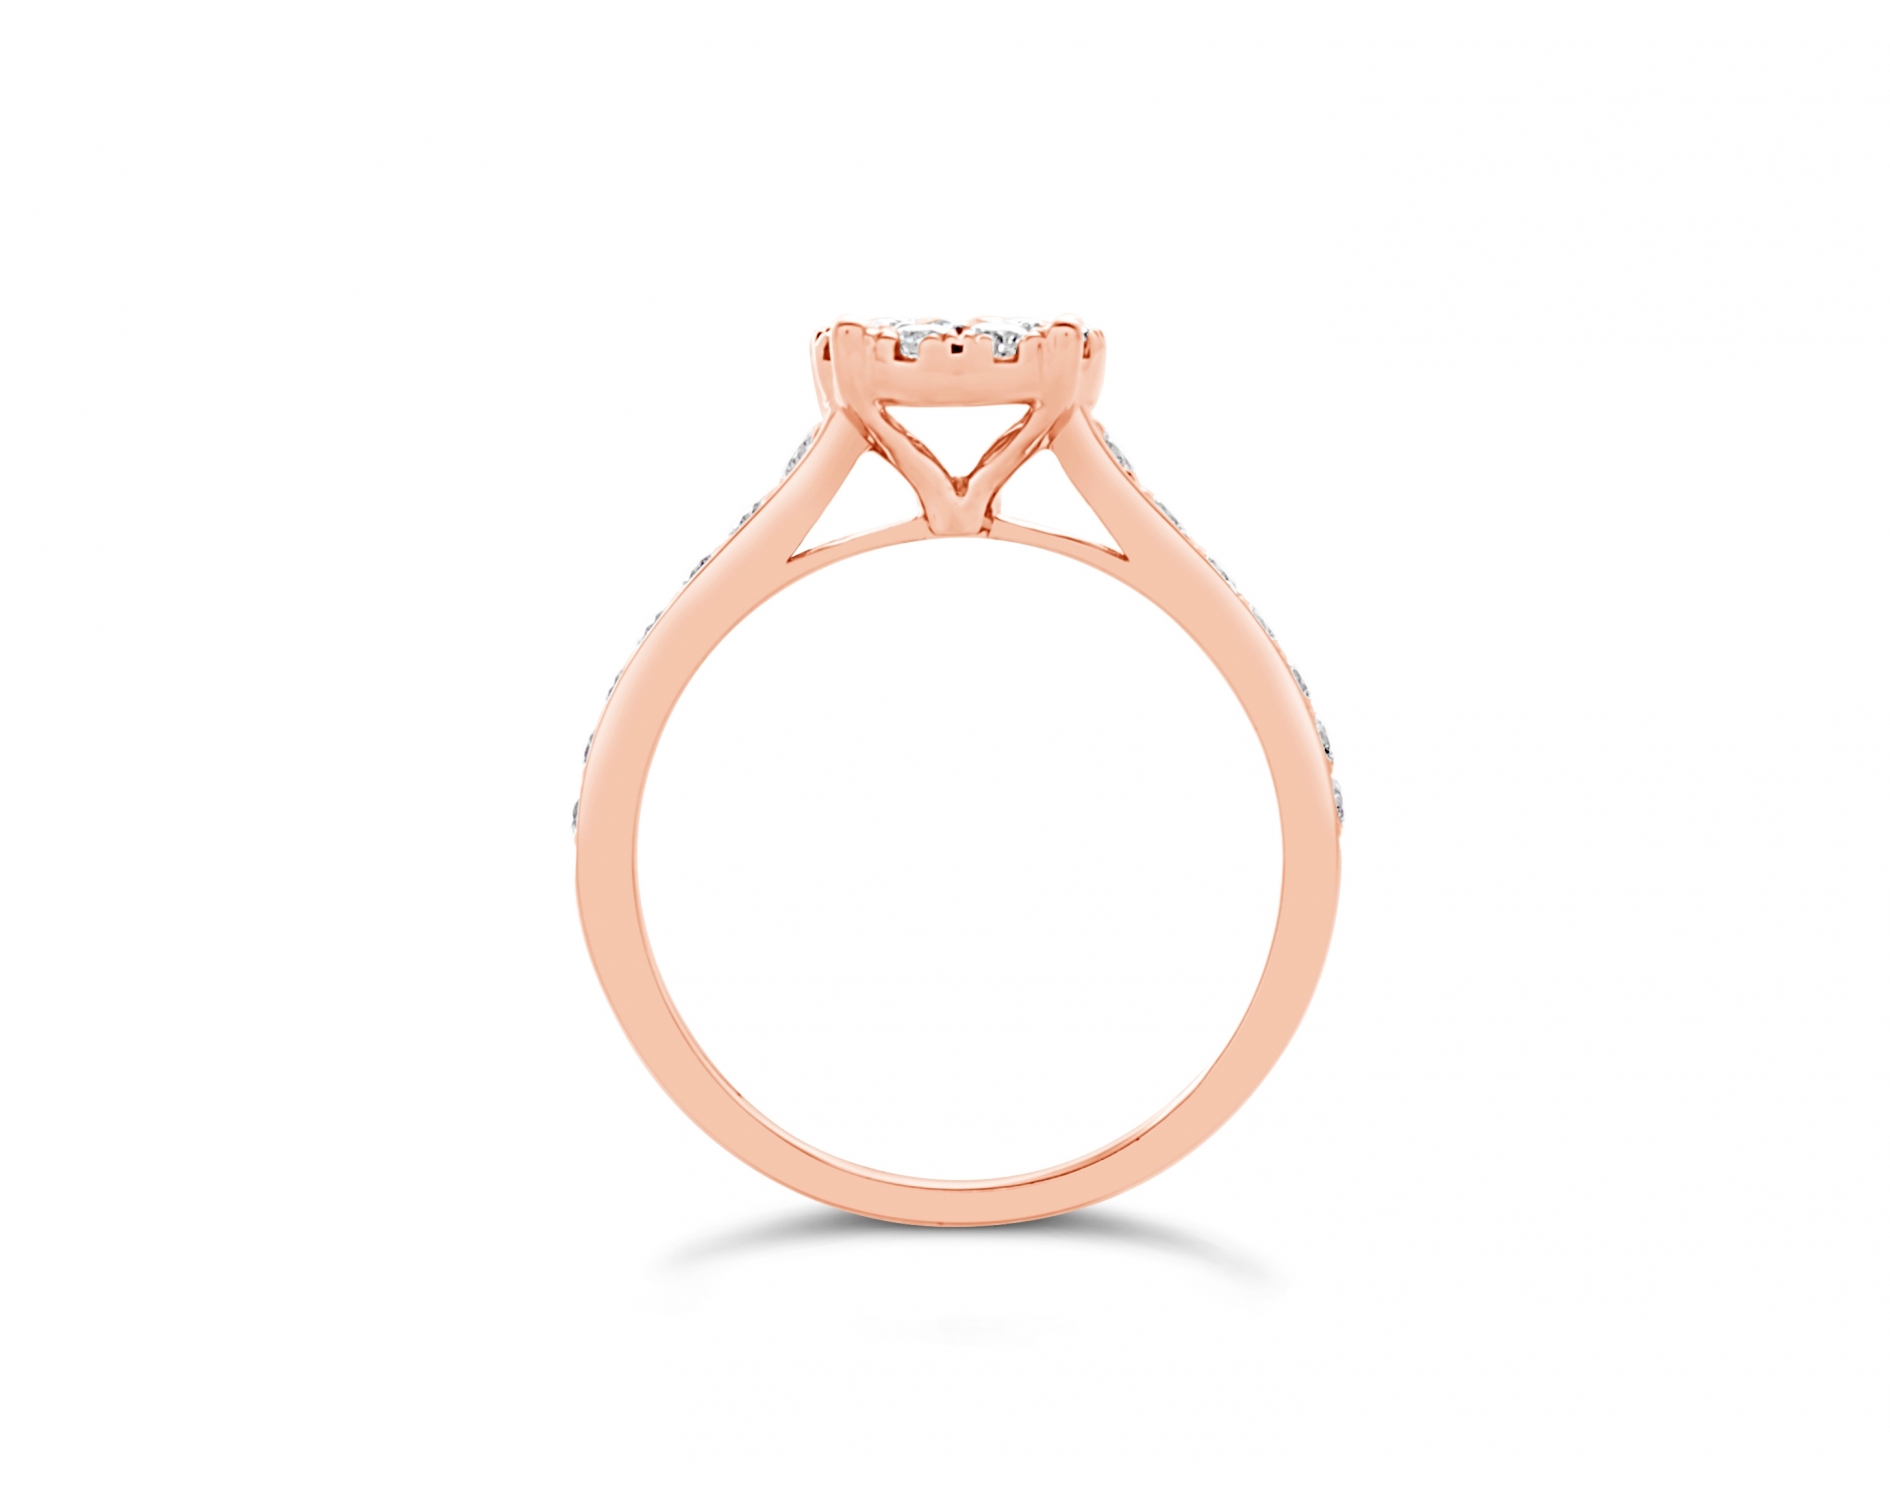 18k rose gold halo illusion set engagement ring with round channel set diamonds